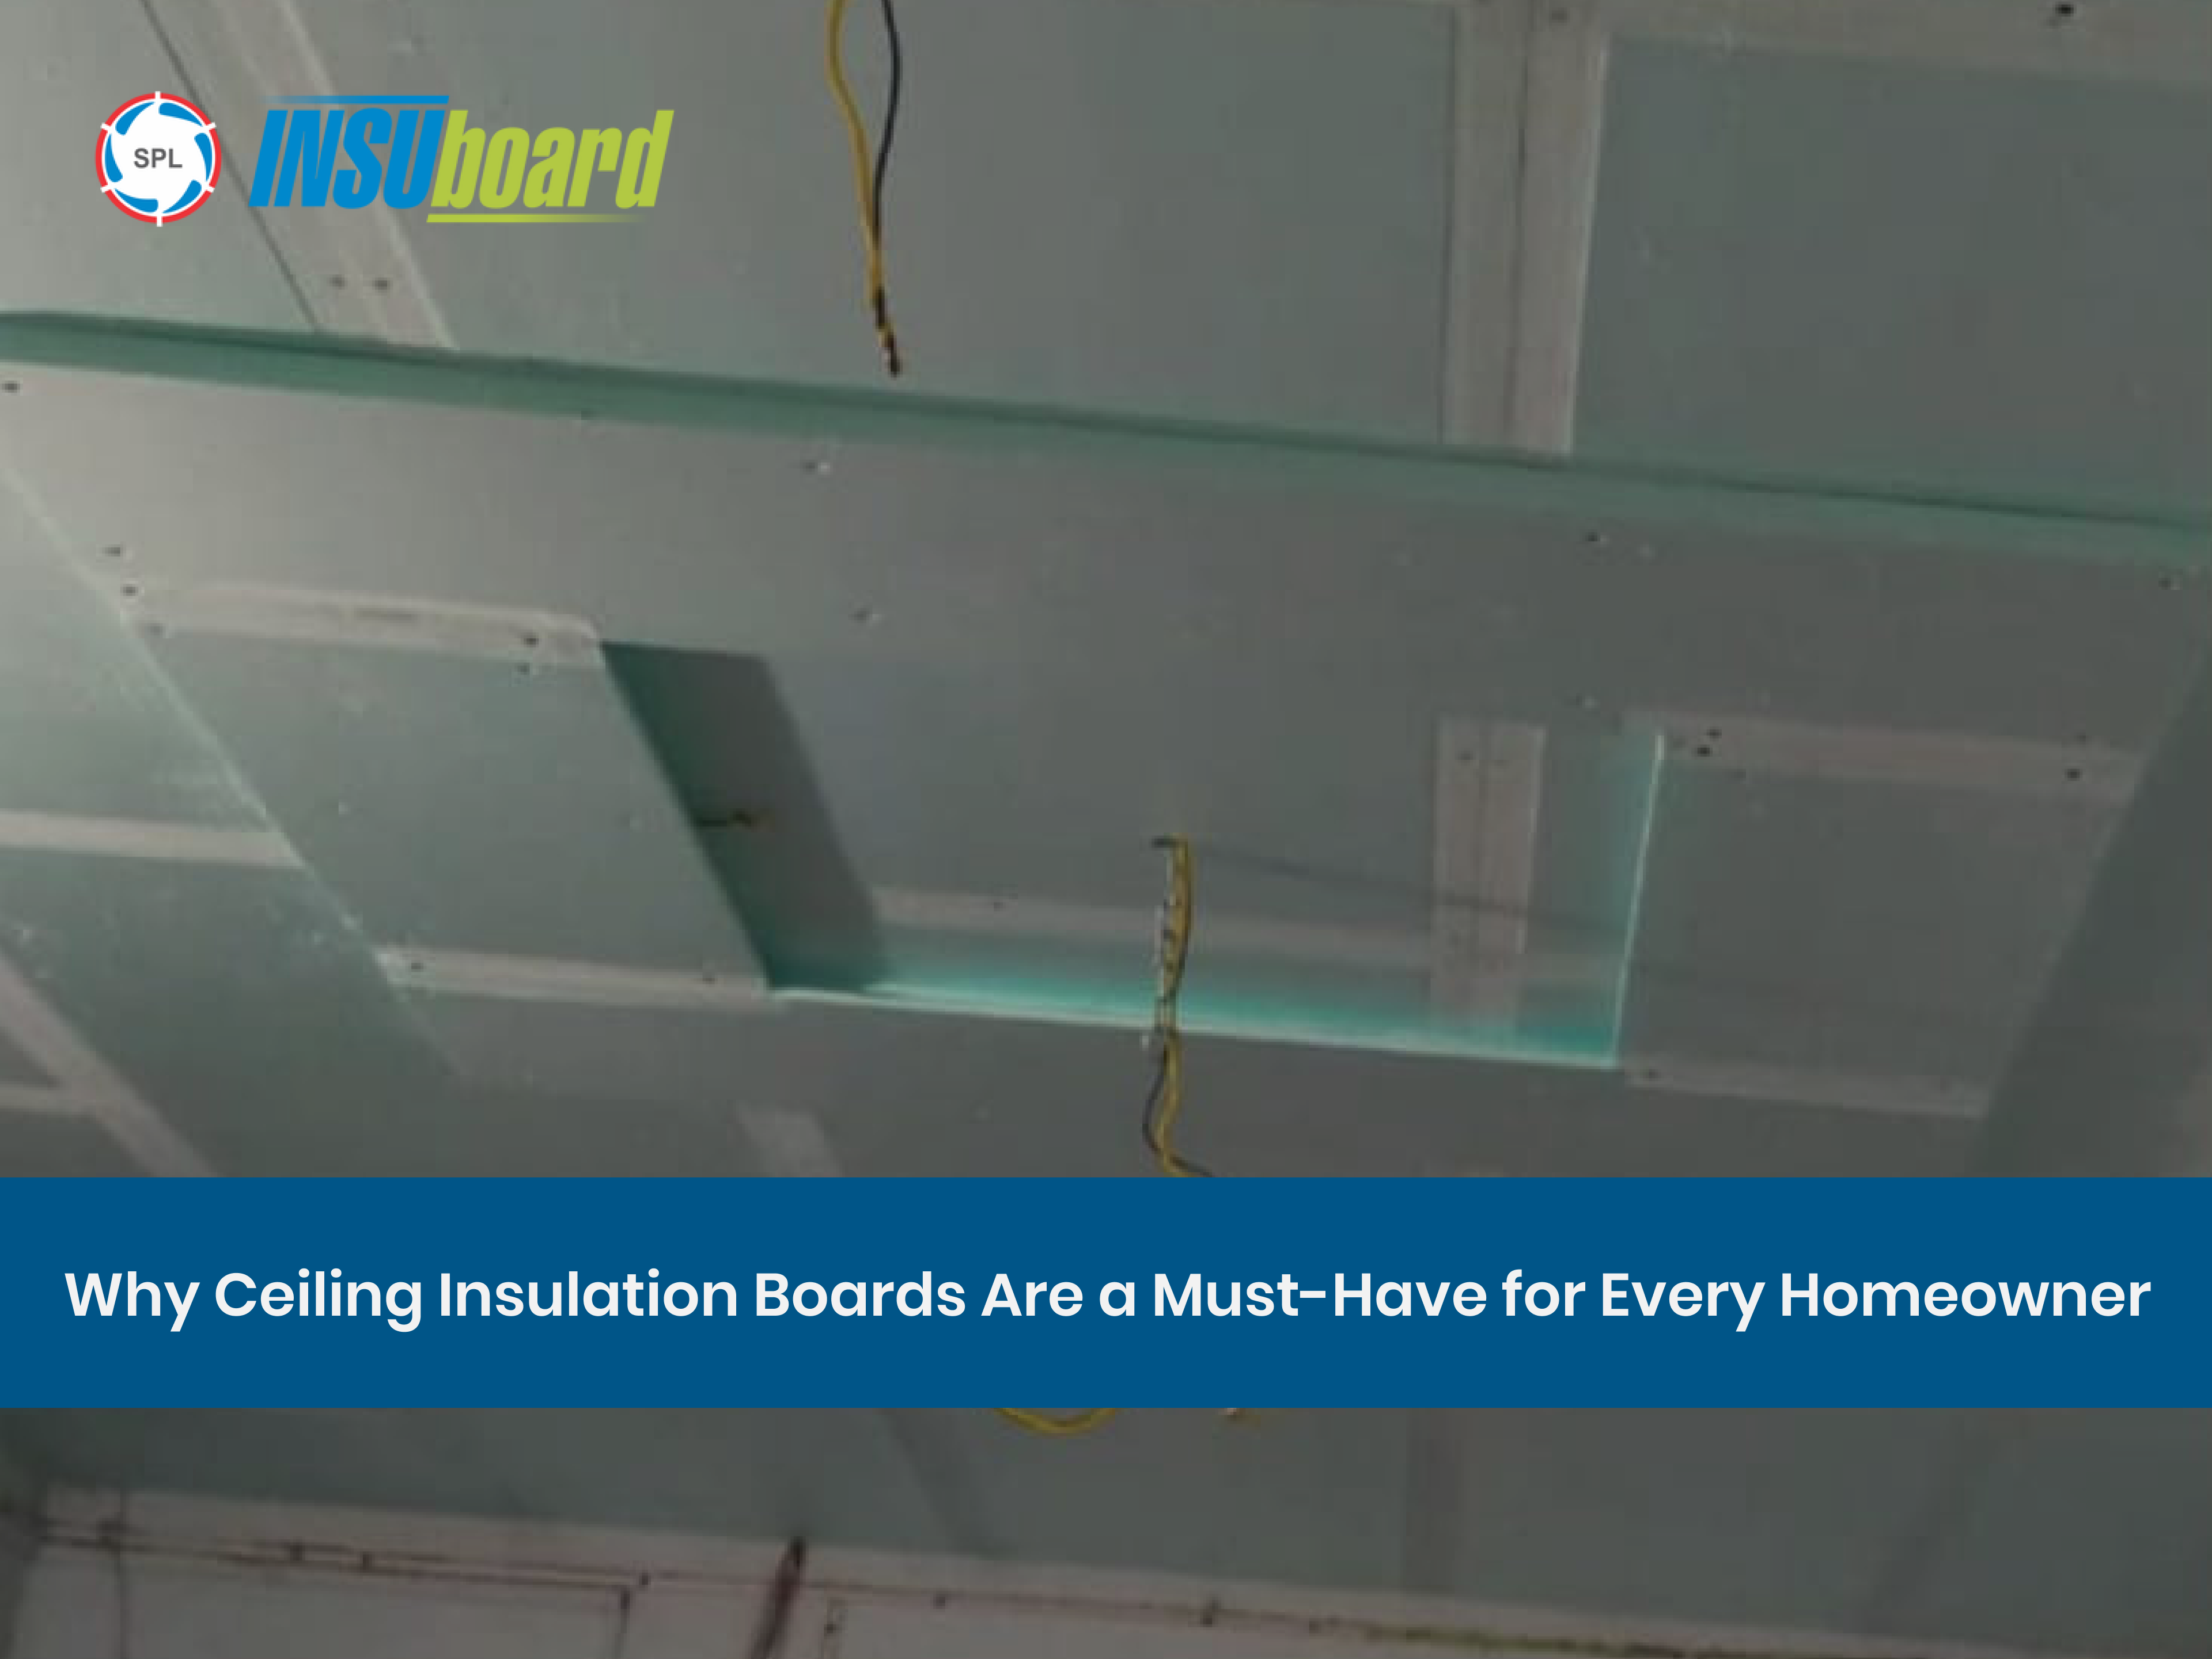 Why Ceiling Insulation Boards Are a Must-Have for Every Homeowner